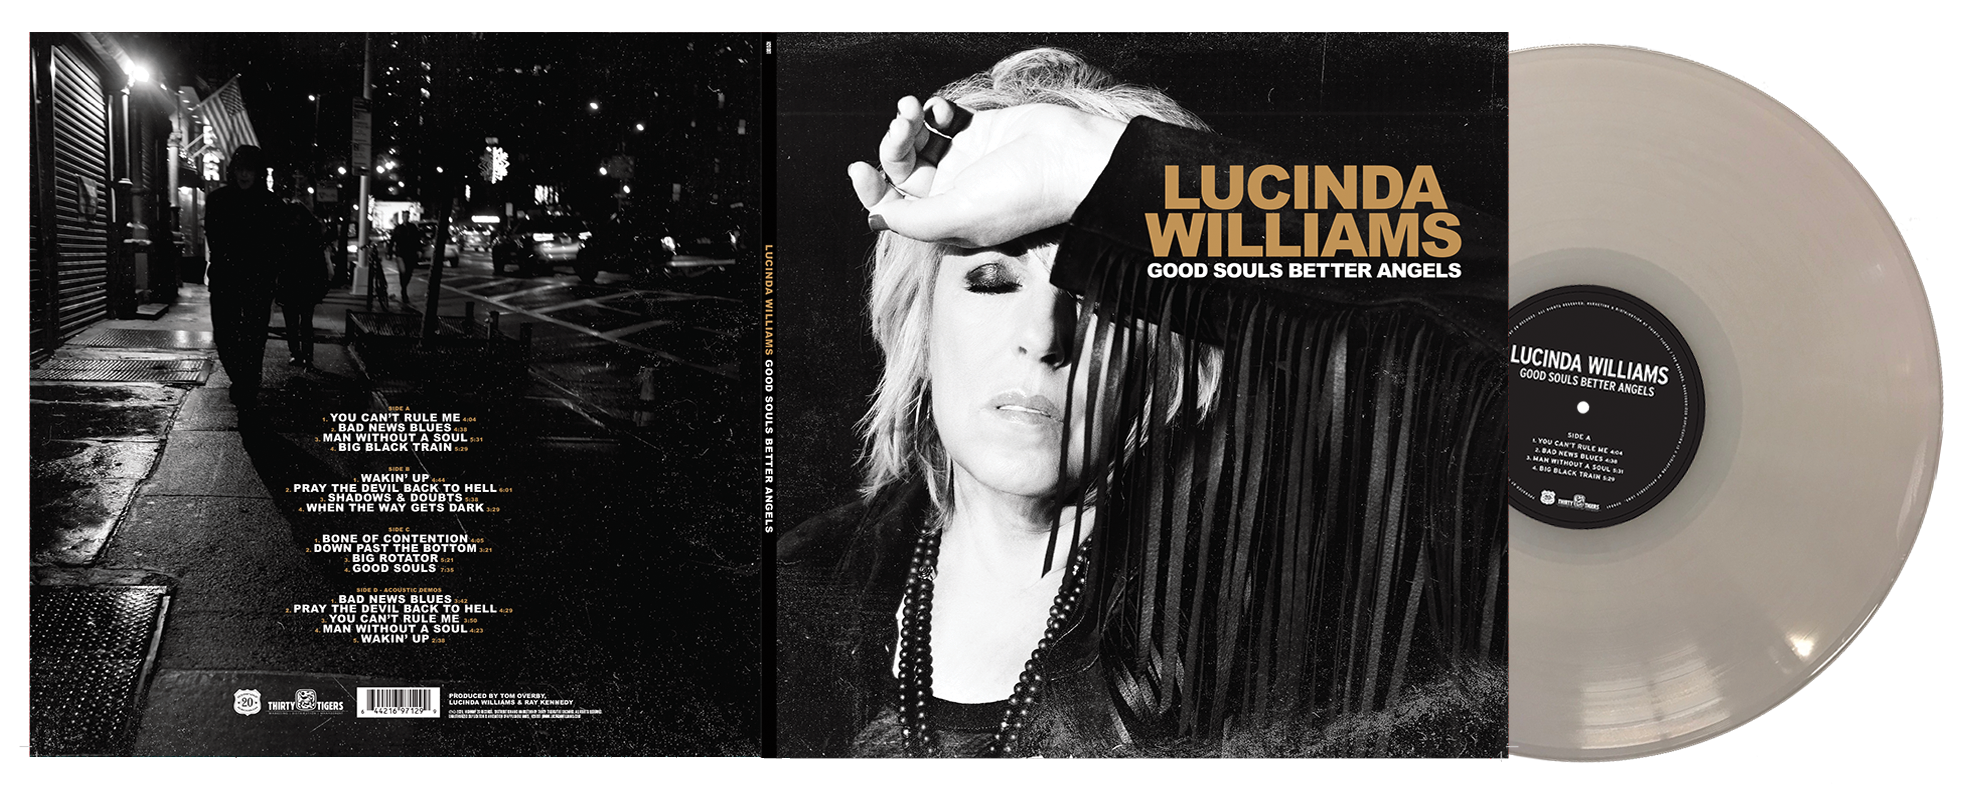 Lucinda Williams - Good Souls Better Angels - New 2 Lp Record 2020 Highway 20 USA Indie Exclusive Natural Colored Vinyl - Country Rock